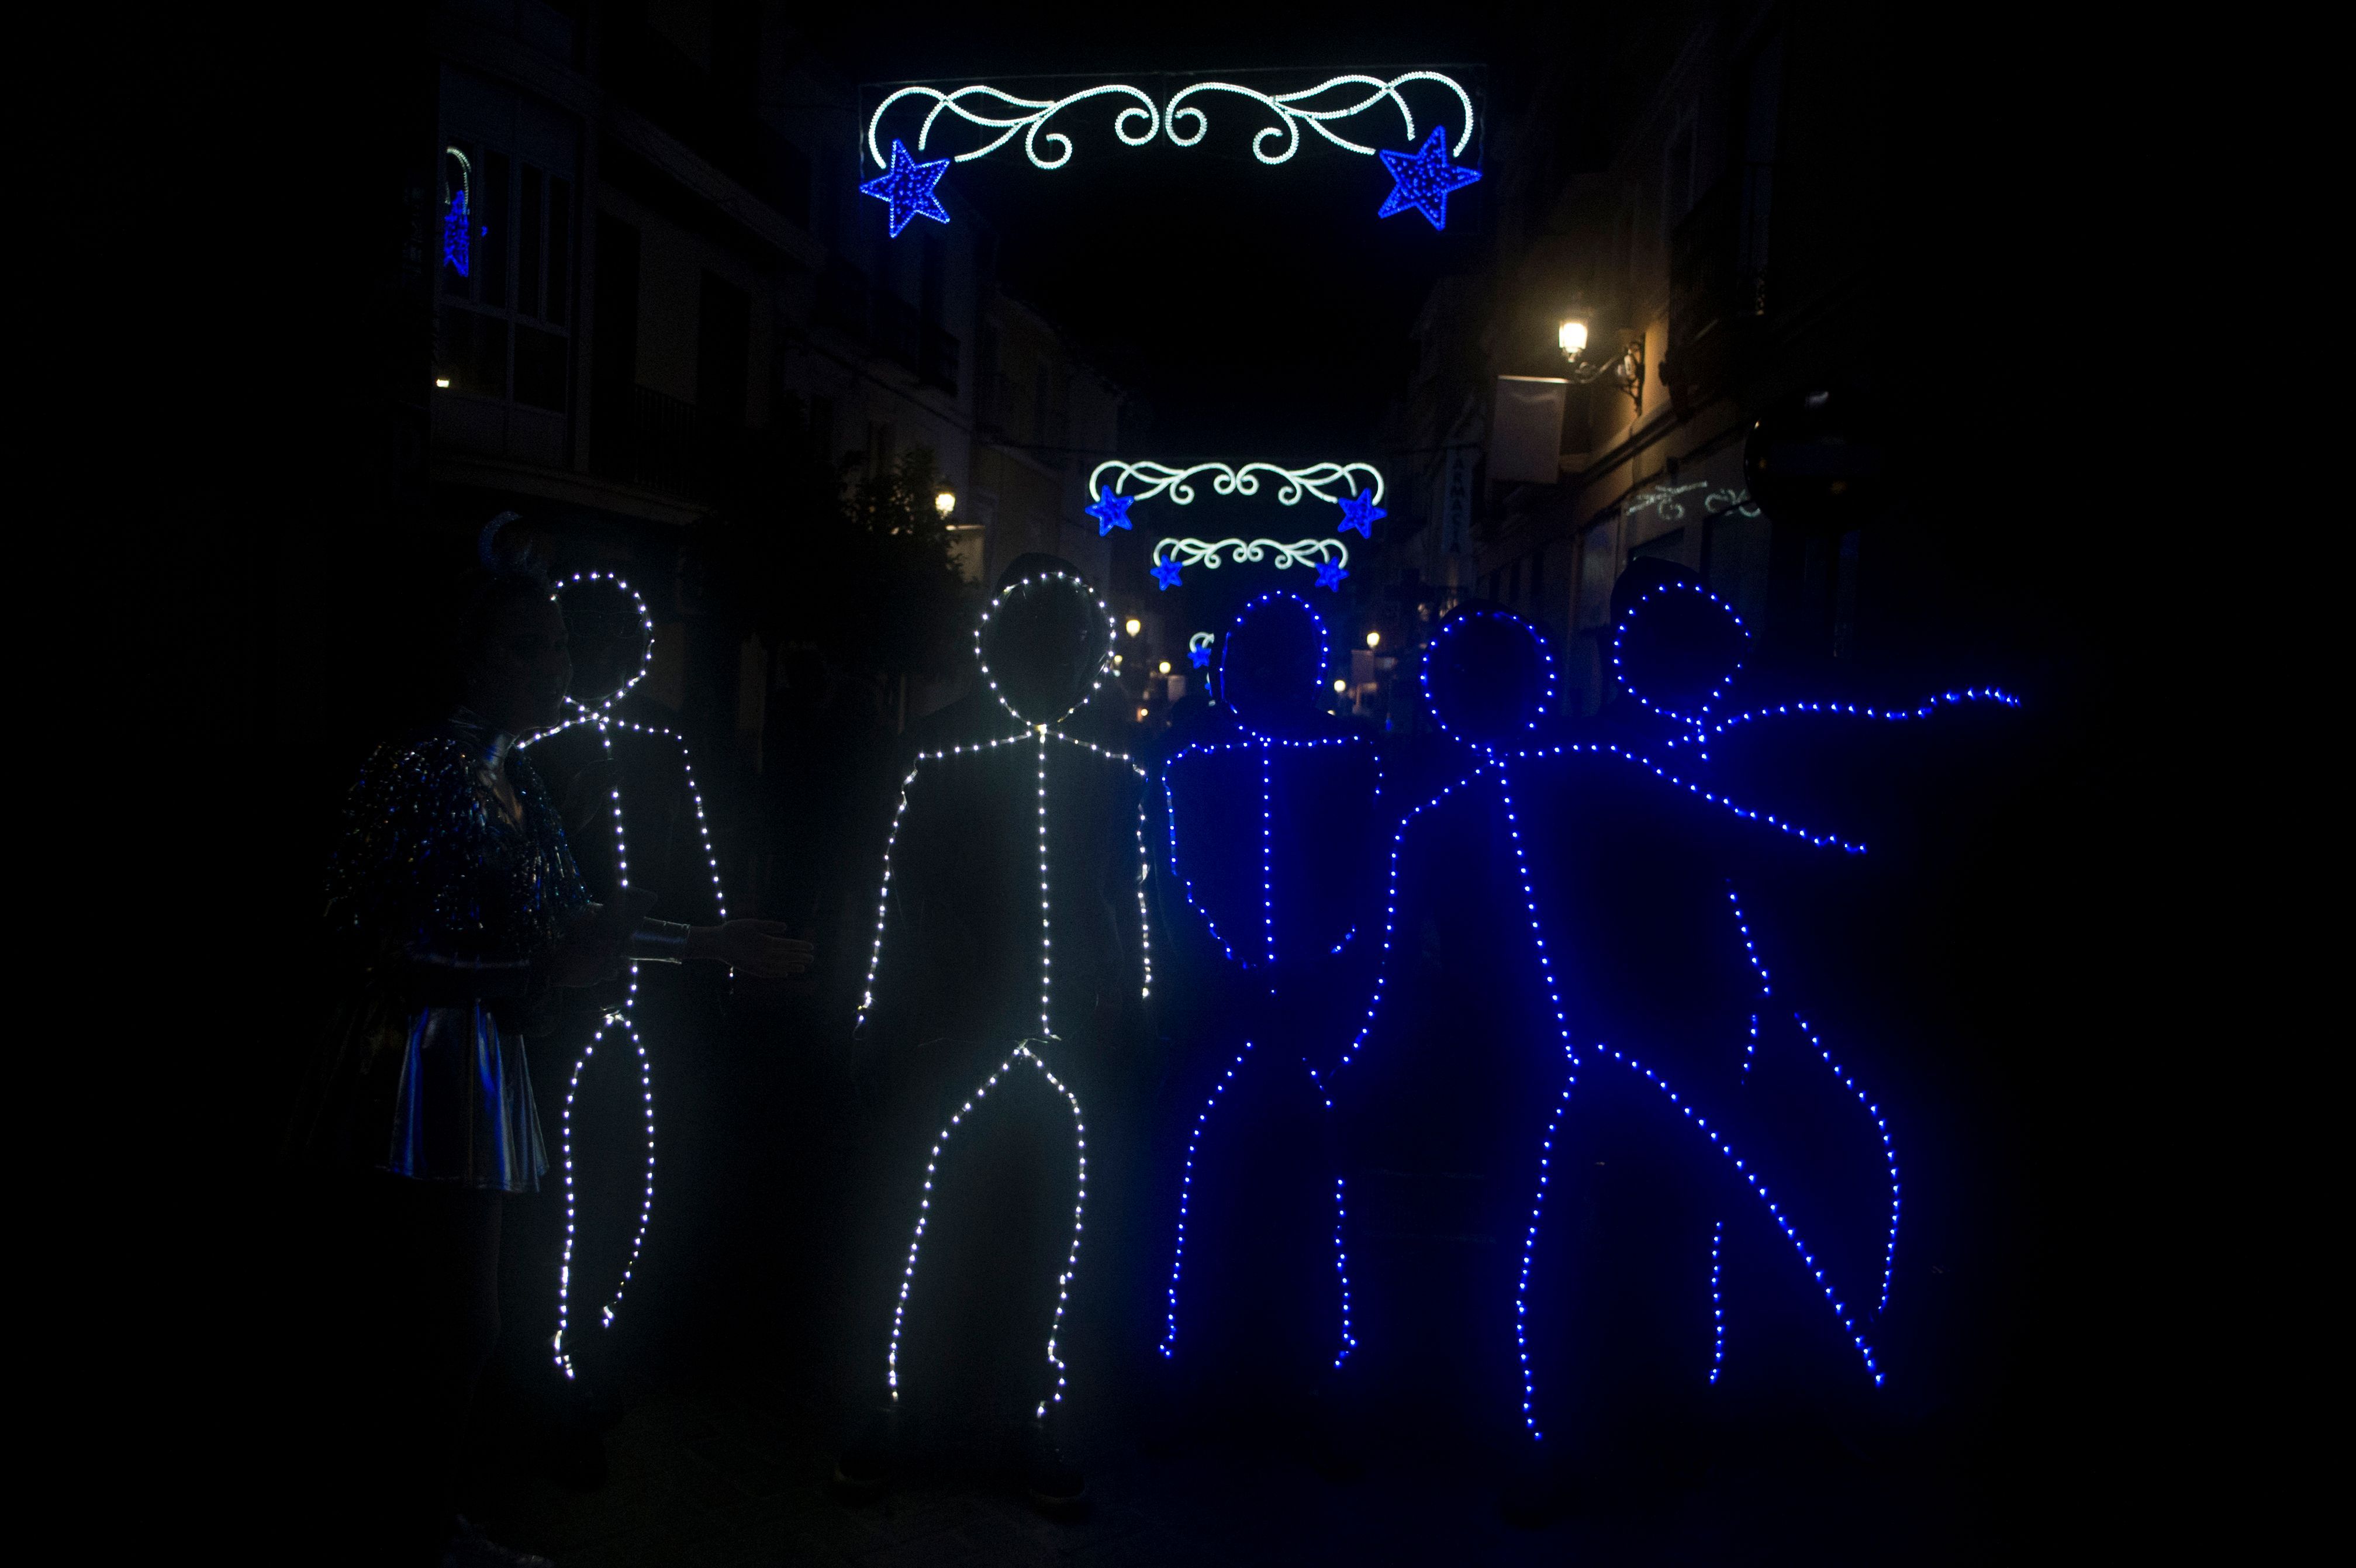 People in light-costumes welcome the new year in Coin, near Malaga, Spain, on January 1